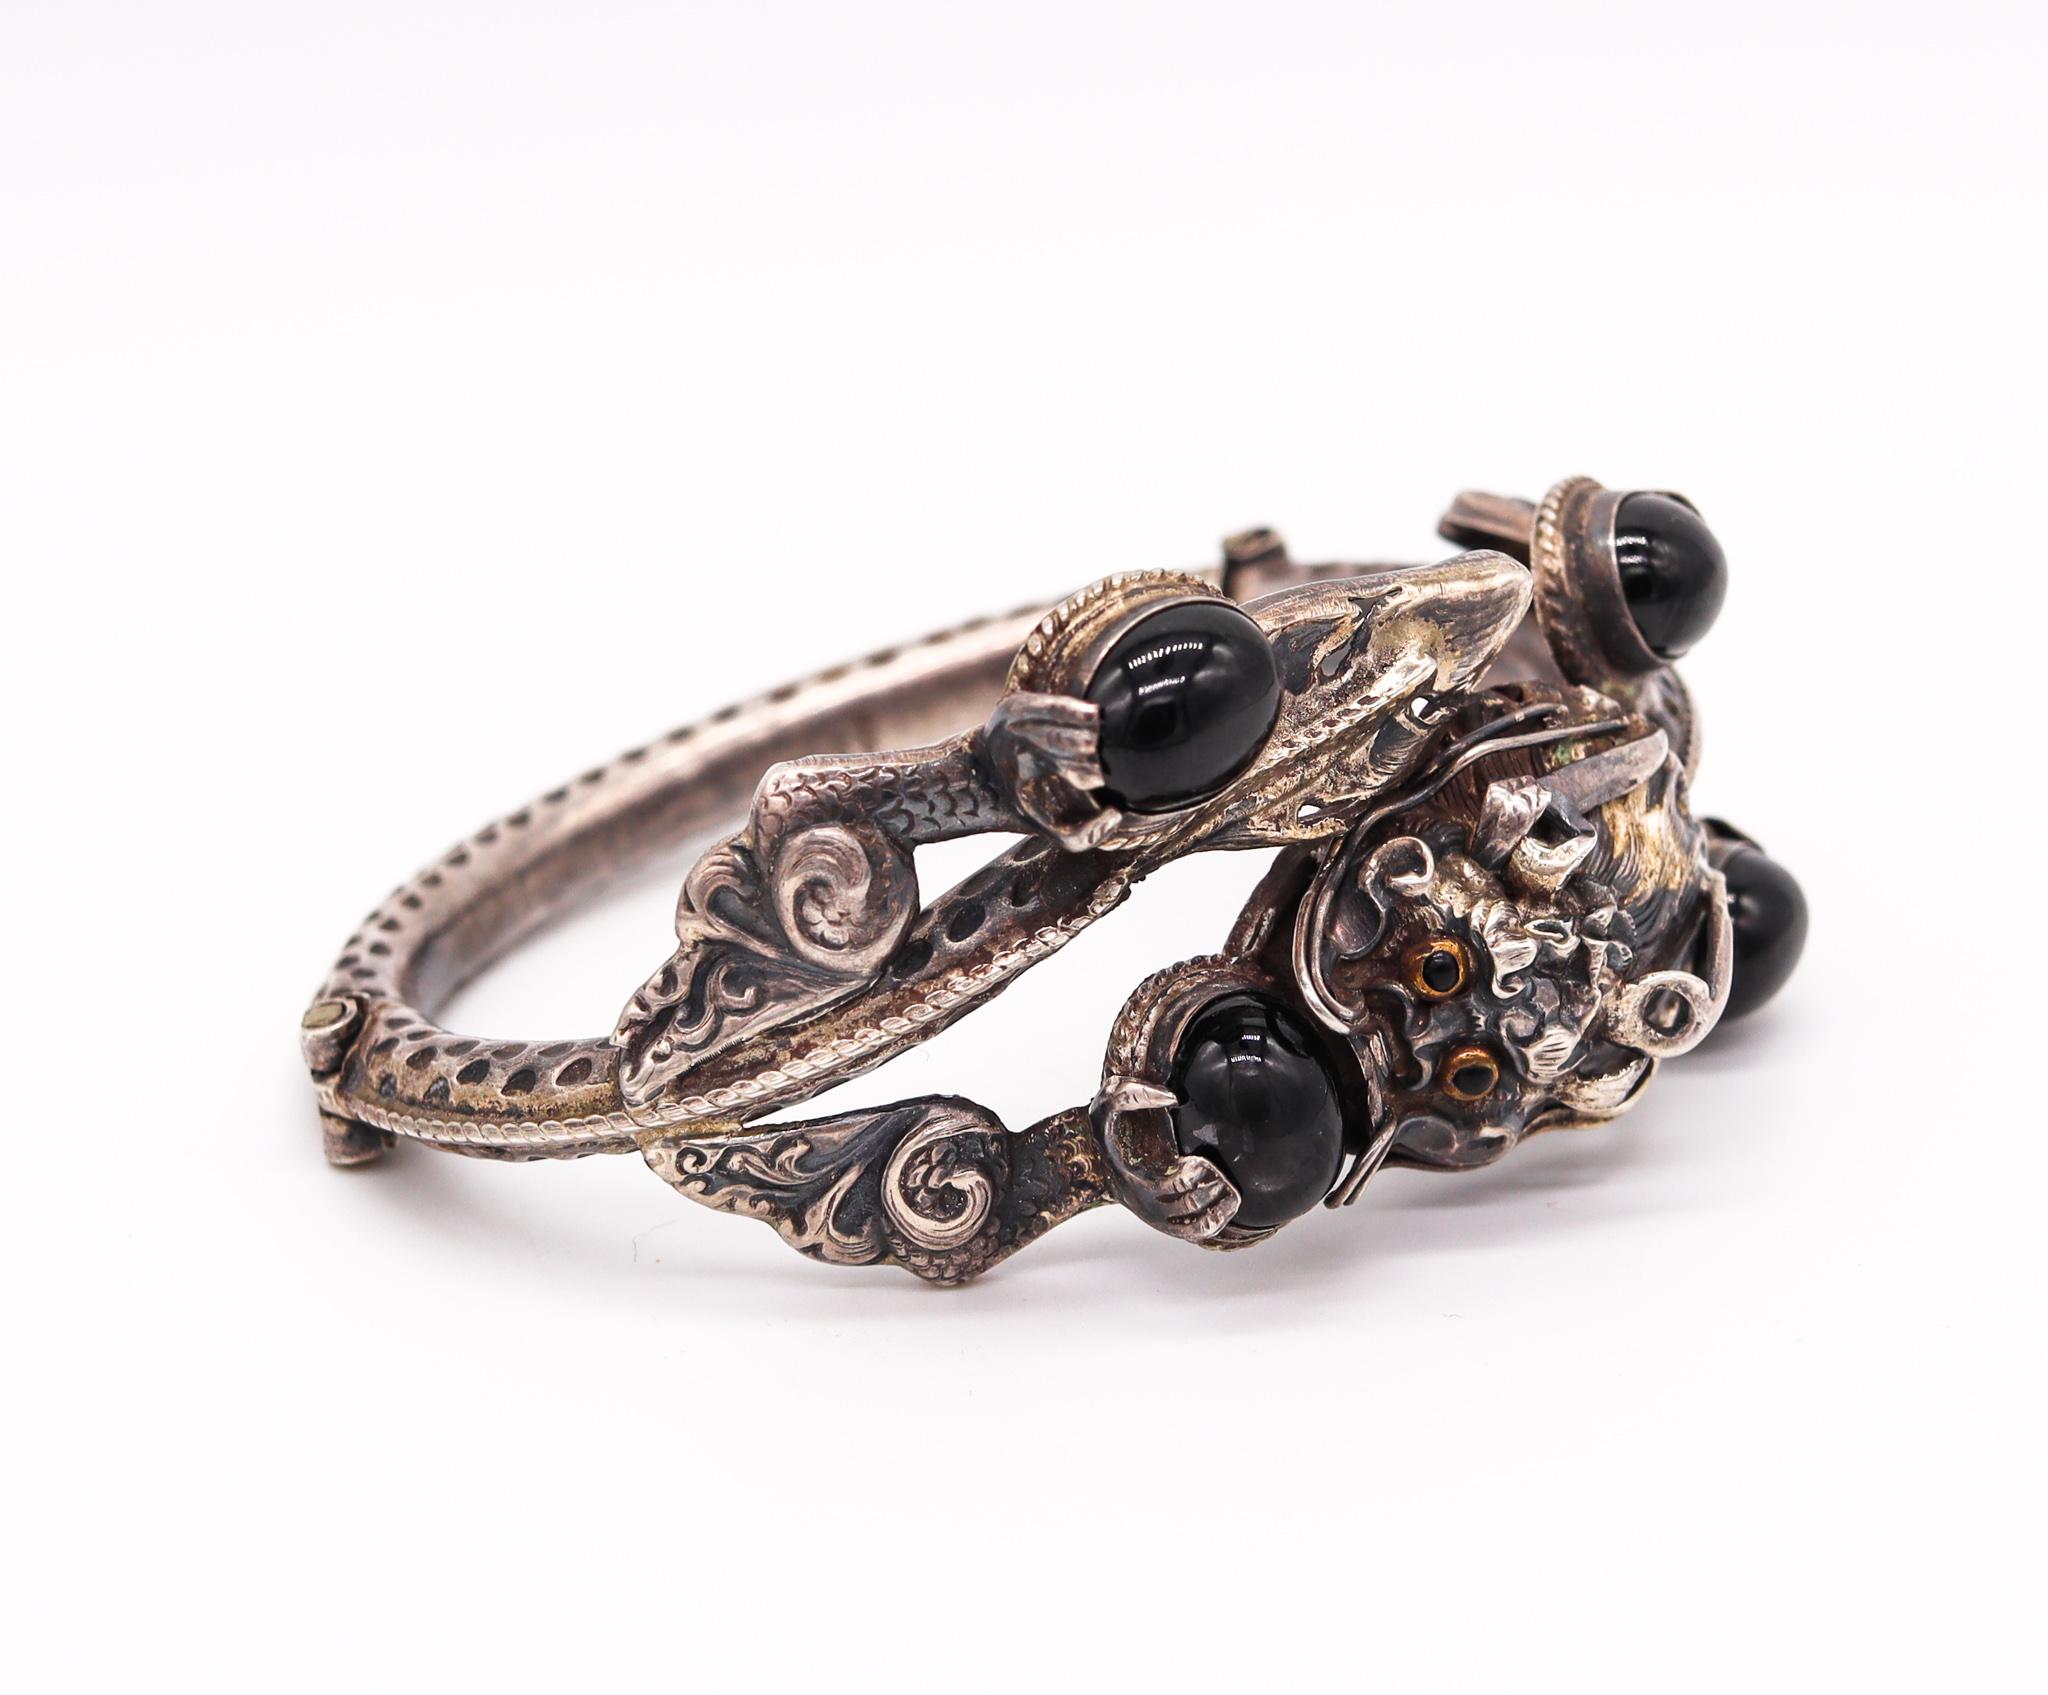 Late Victorian China 1900 Export Dragon Bracelet in 925 Sterling Silver with Cat's Eye Obsidian